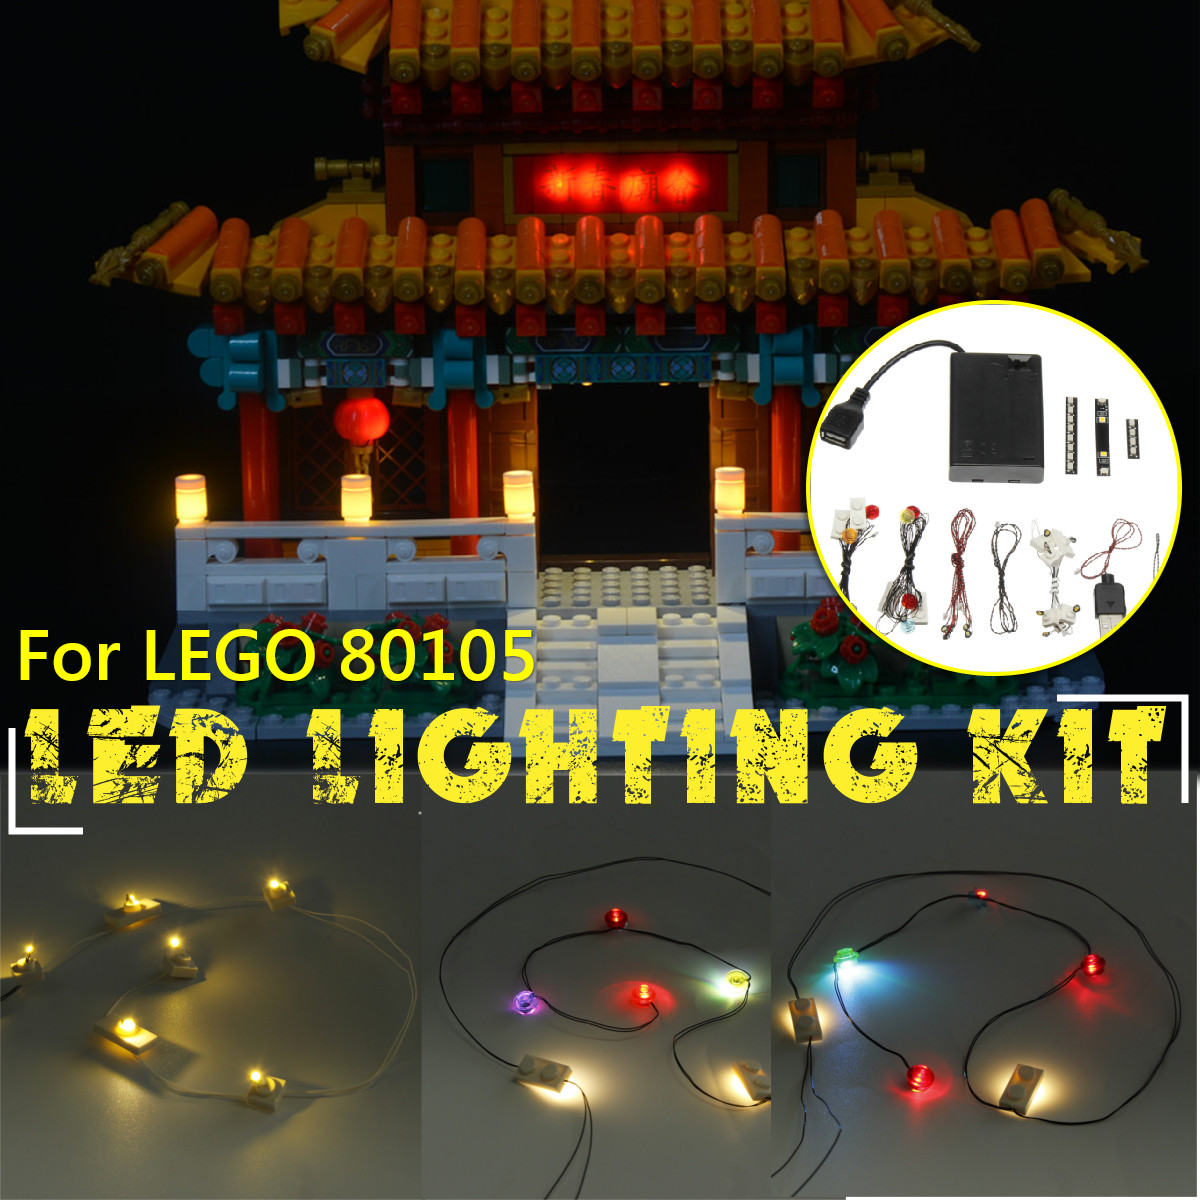 DIY-LED-Light-Kit-For-LEGO-80105-Chinese-New-Year-Temple-Fair-80105-Lighting-Building-1647977-1